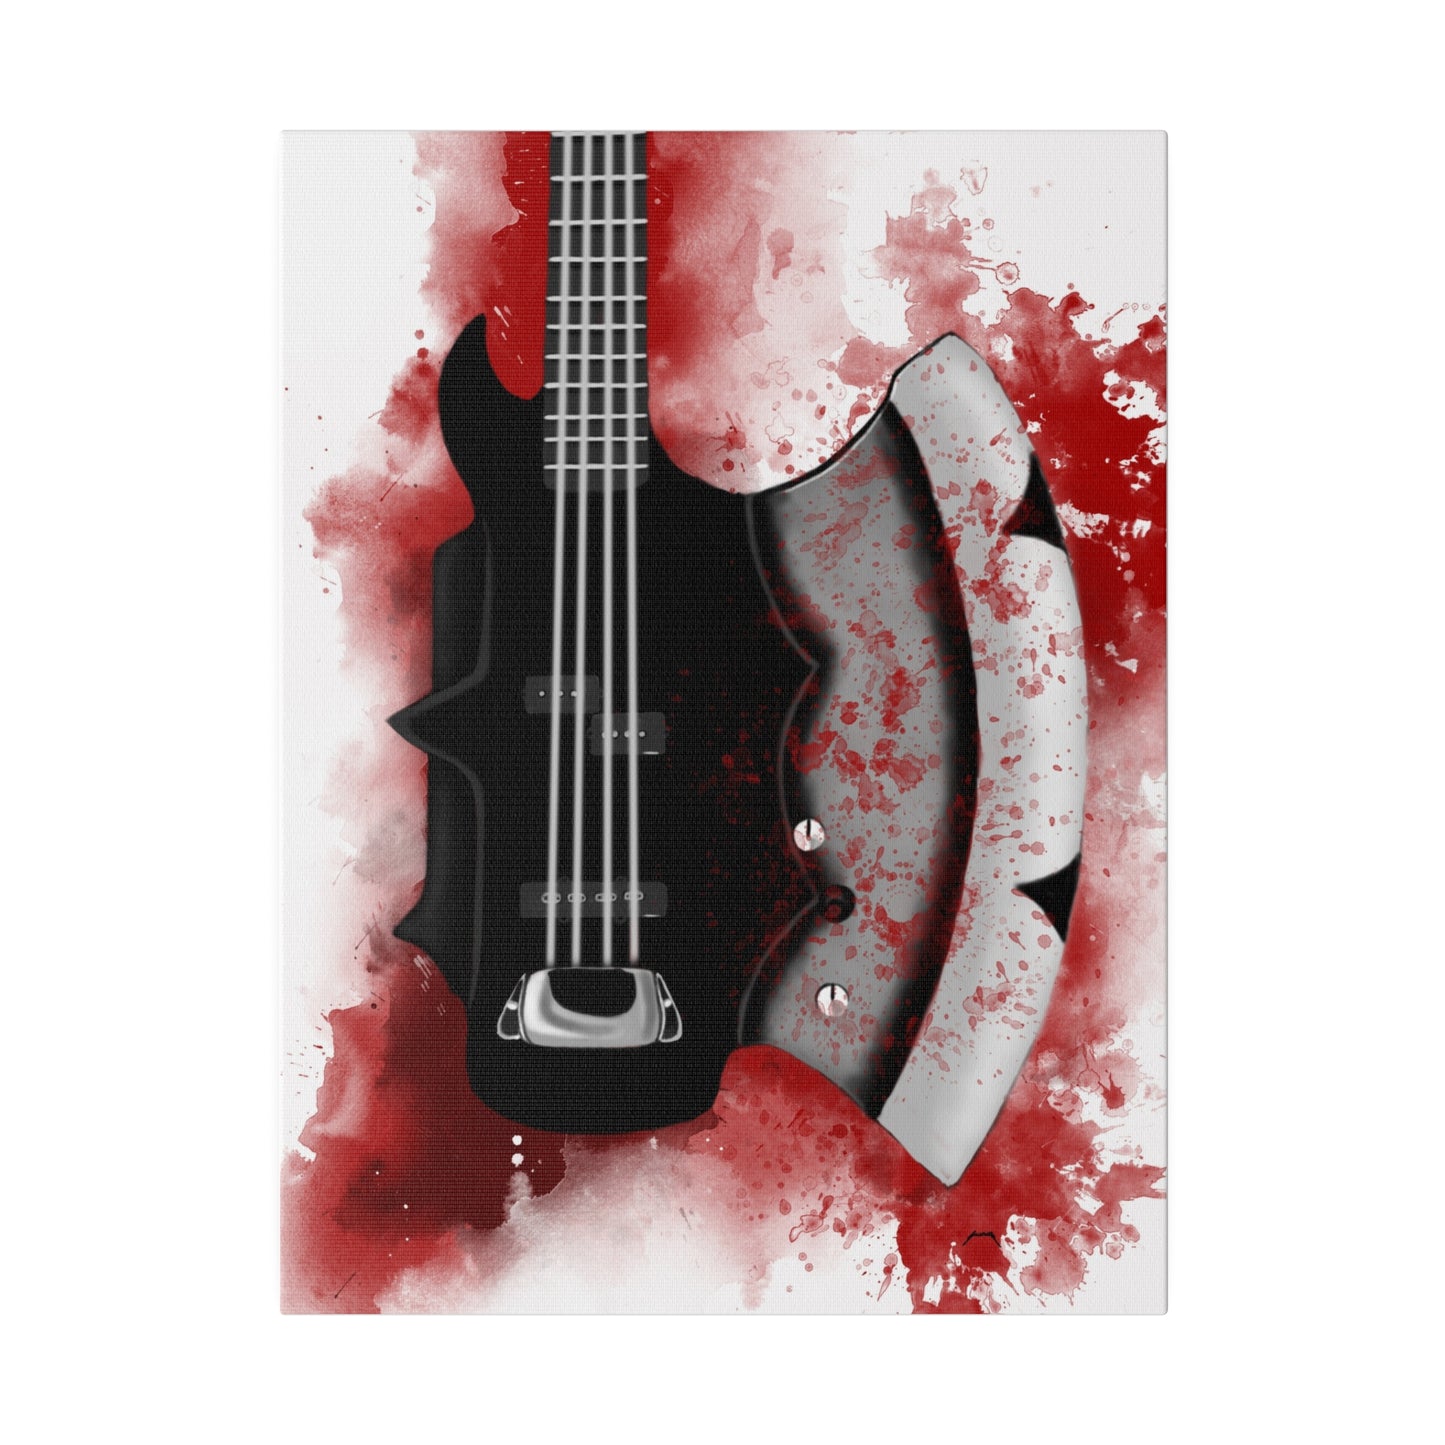 Digital painting of a bloody axe bass guitar printed on canvas